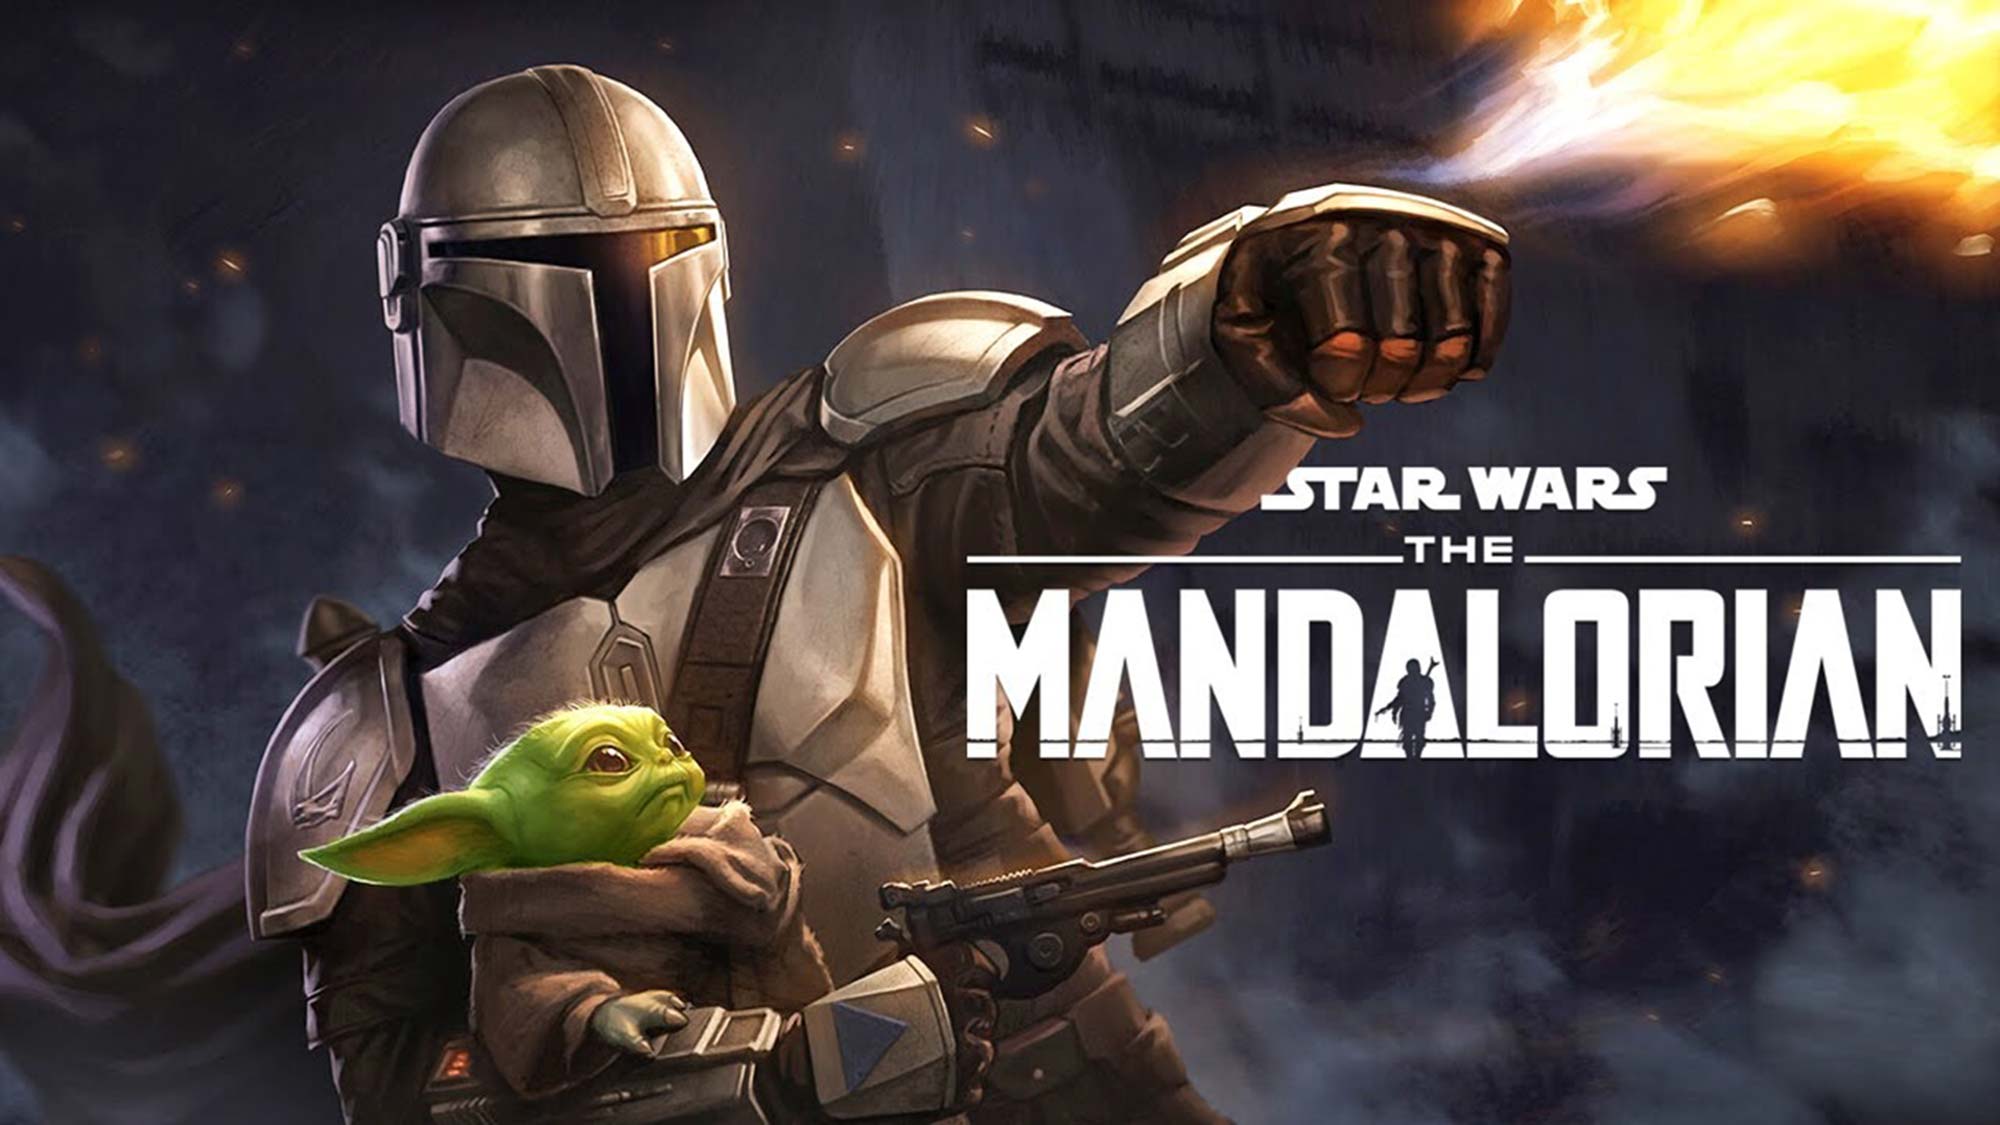 Star Wars timeline: Where exactly does 'The Mandalorian' fit? – Film Daily